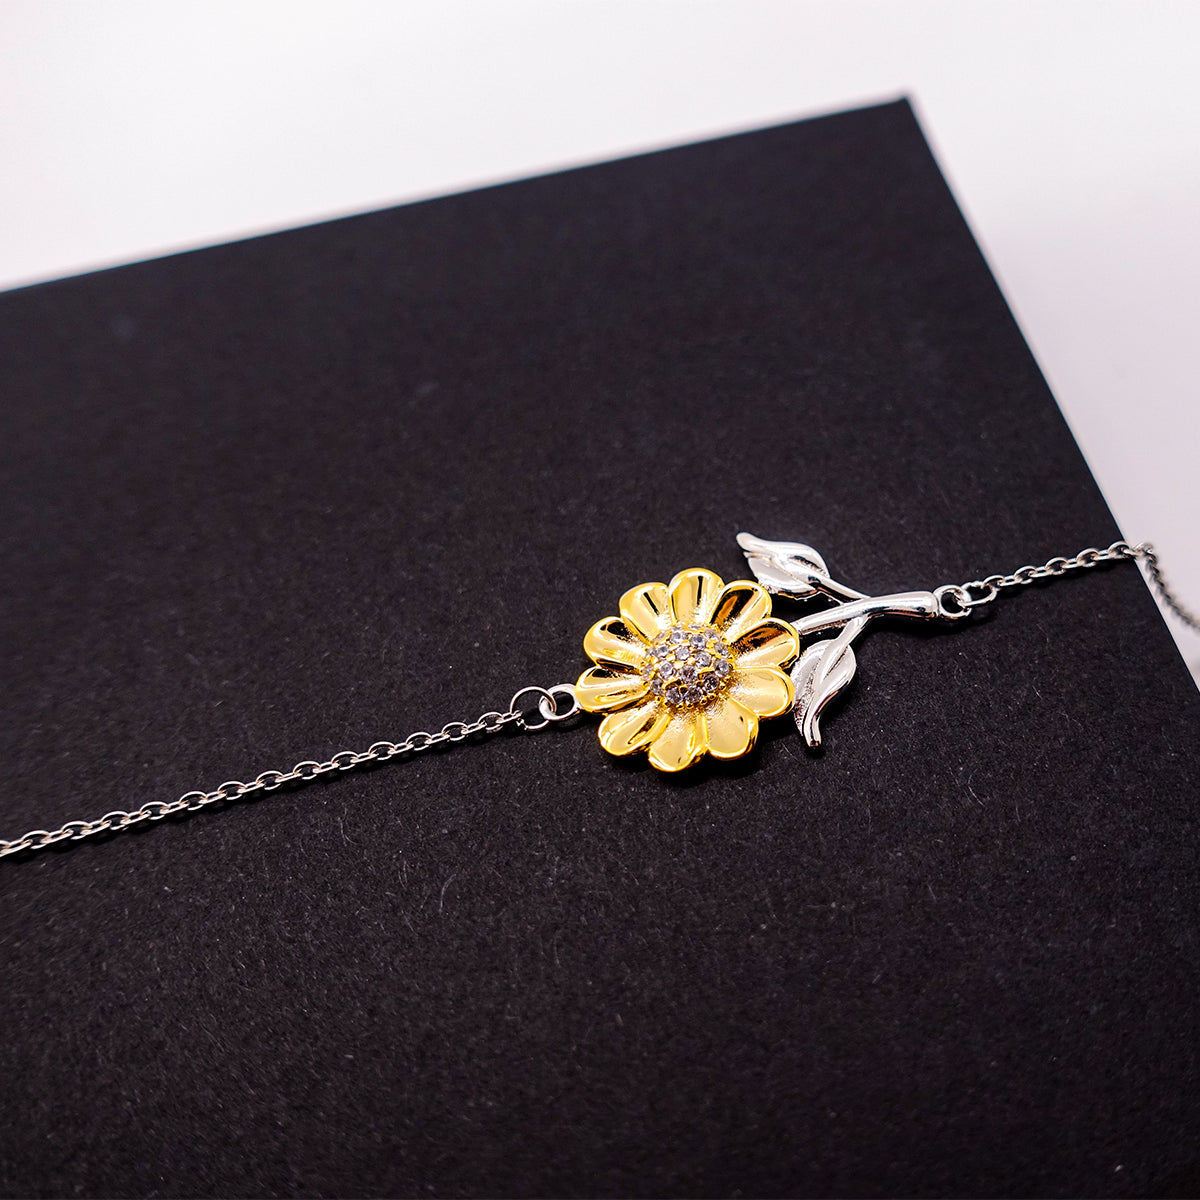 Nephew Sunflower Bracelet, Never forget that I love you forever, Inspirational Nephew Birthday Unique Gifts From Aunt